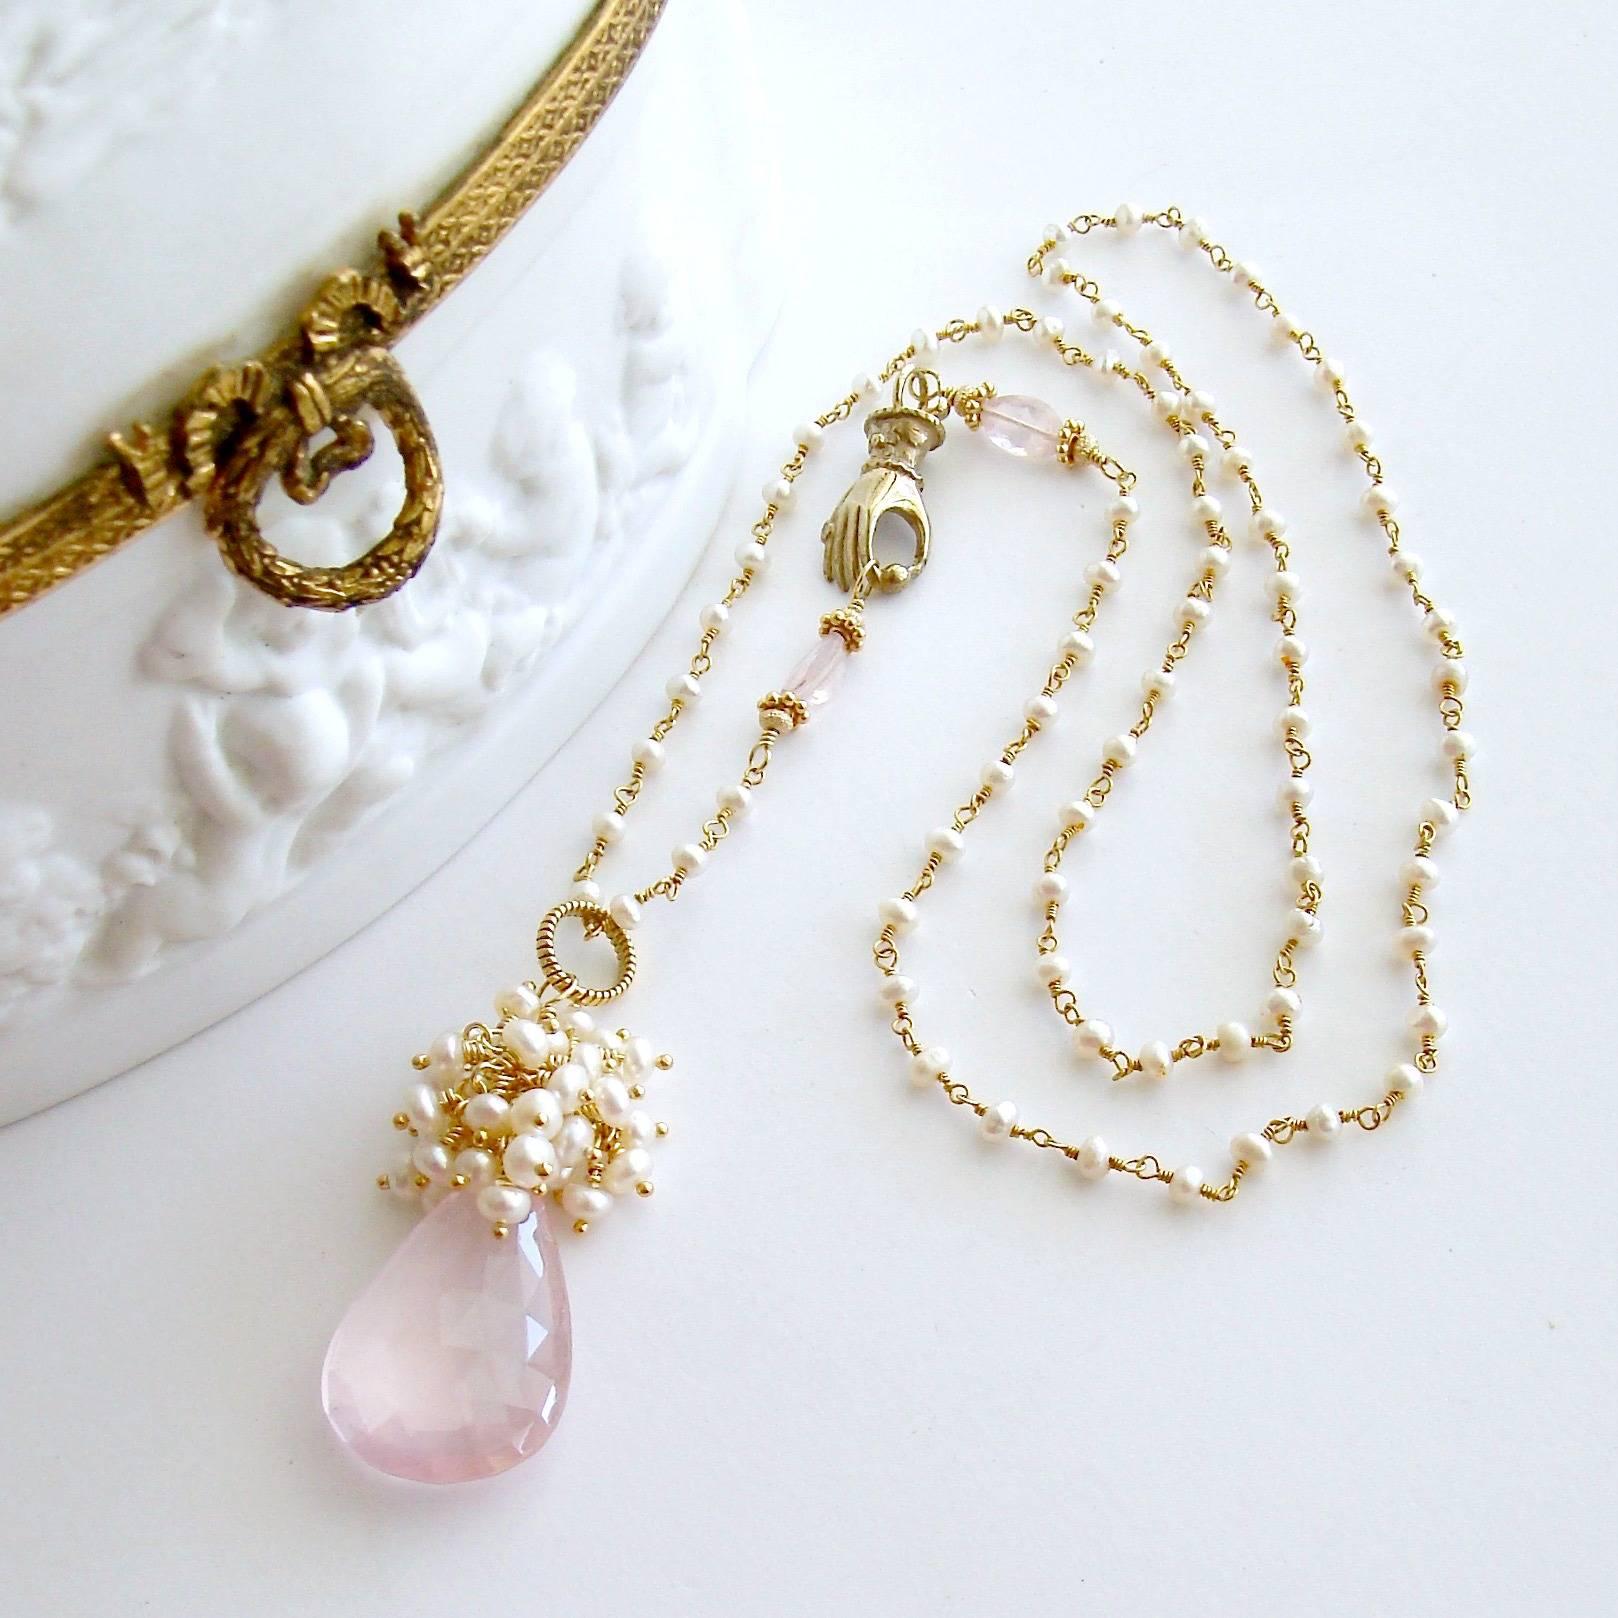 Pétales de Rose III Necklace.

A delicate blush pink and diaphanous faceted briolette pear-cut rose quartz briolette is crowned with a frothy explosion of creamy white button pearls to create a traditional, yet uniquely feminine pendant. This